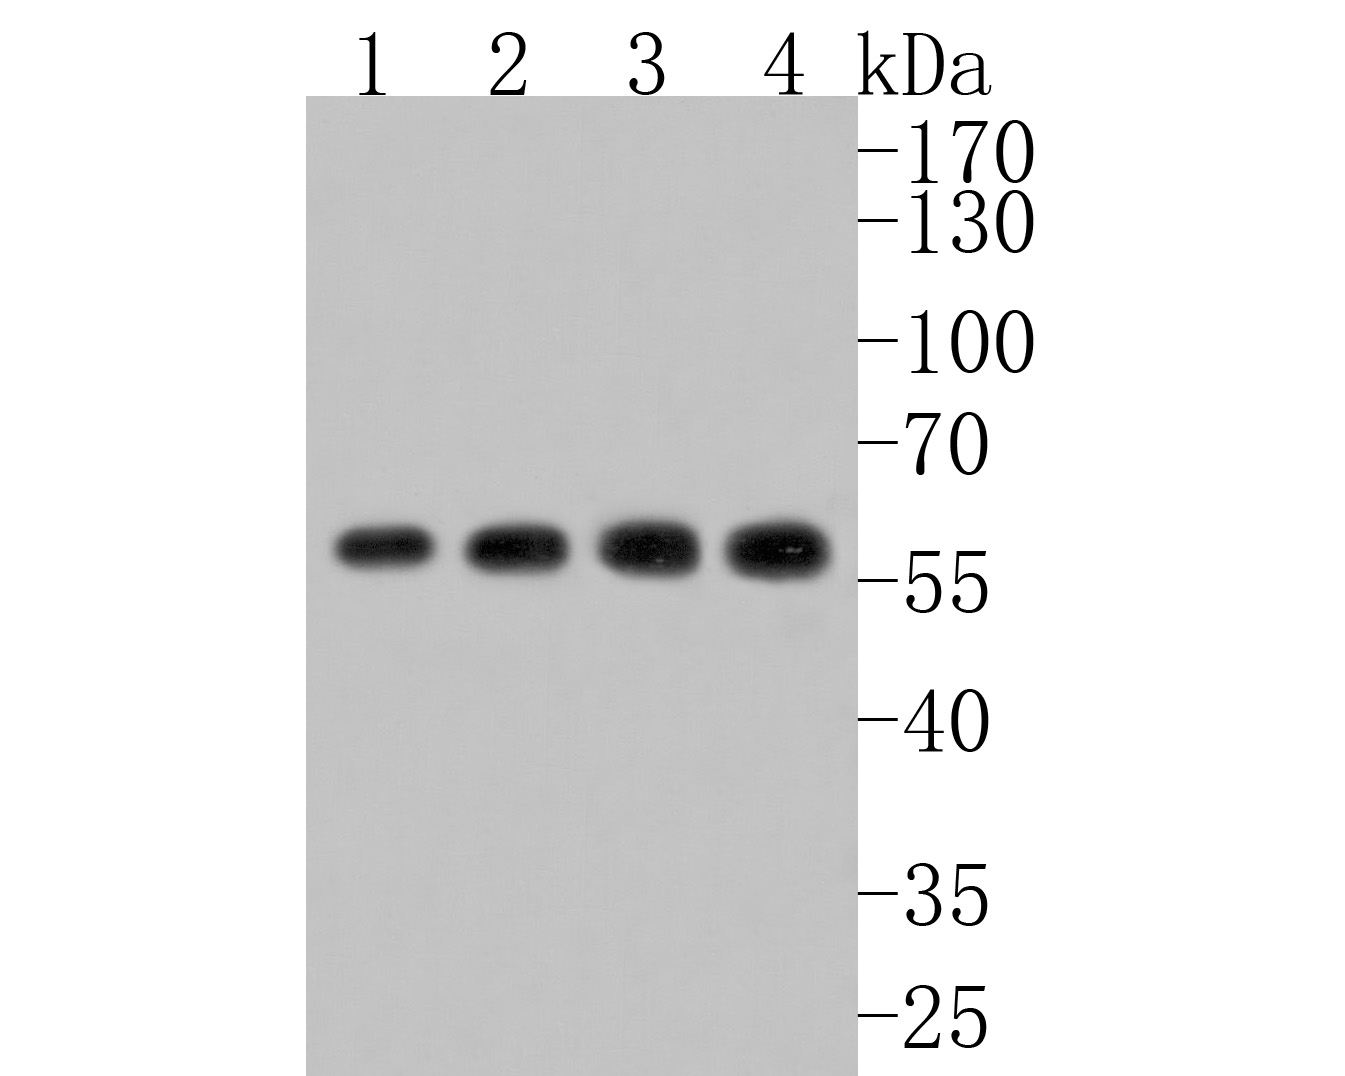 Western blot analysis of CAP1 on different lysates. Proteins were transferred to a PVDF membrane and blocked with 5% NFDM/TBST for 1 hour at room temperature. The primary antibody (HA720069, 1/500) was used in 5% NFDM/TBST at room temperature for 2 hours. Goat Anti-Rabbit IgG - HRP Secondary Antibody (HA1001) at 1:200,000 dilution was used for 1 hour at room temperature.<br />
Positive control: <br />
Lane 1: Hela cell lysate<br />
Lane 2: A431 cell lysate<br />
Lane 1: HepG2 cell lysate<br />
Lane 2: Raji cell lysate